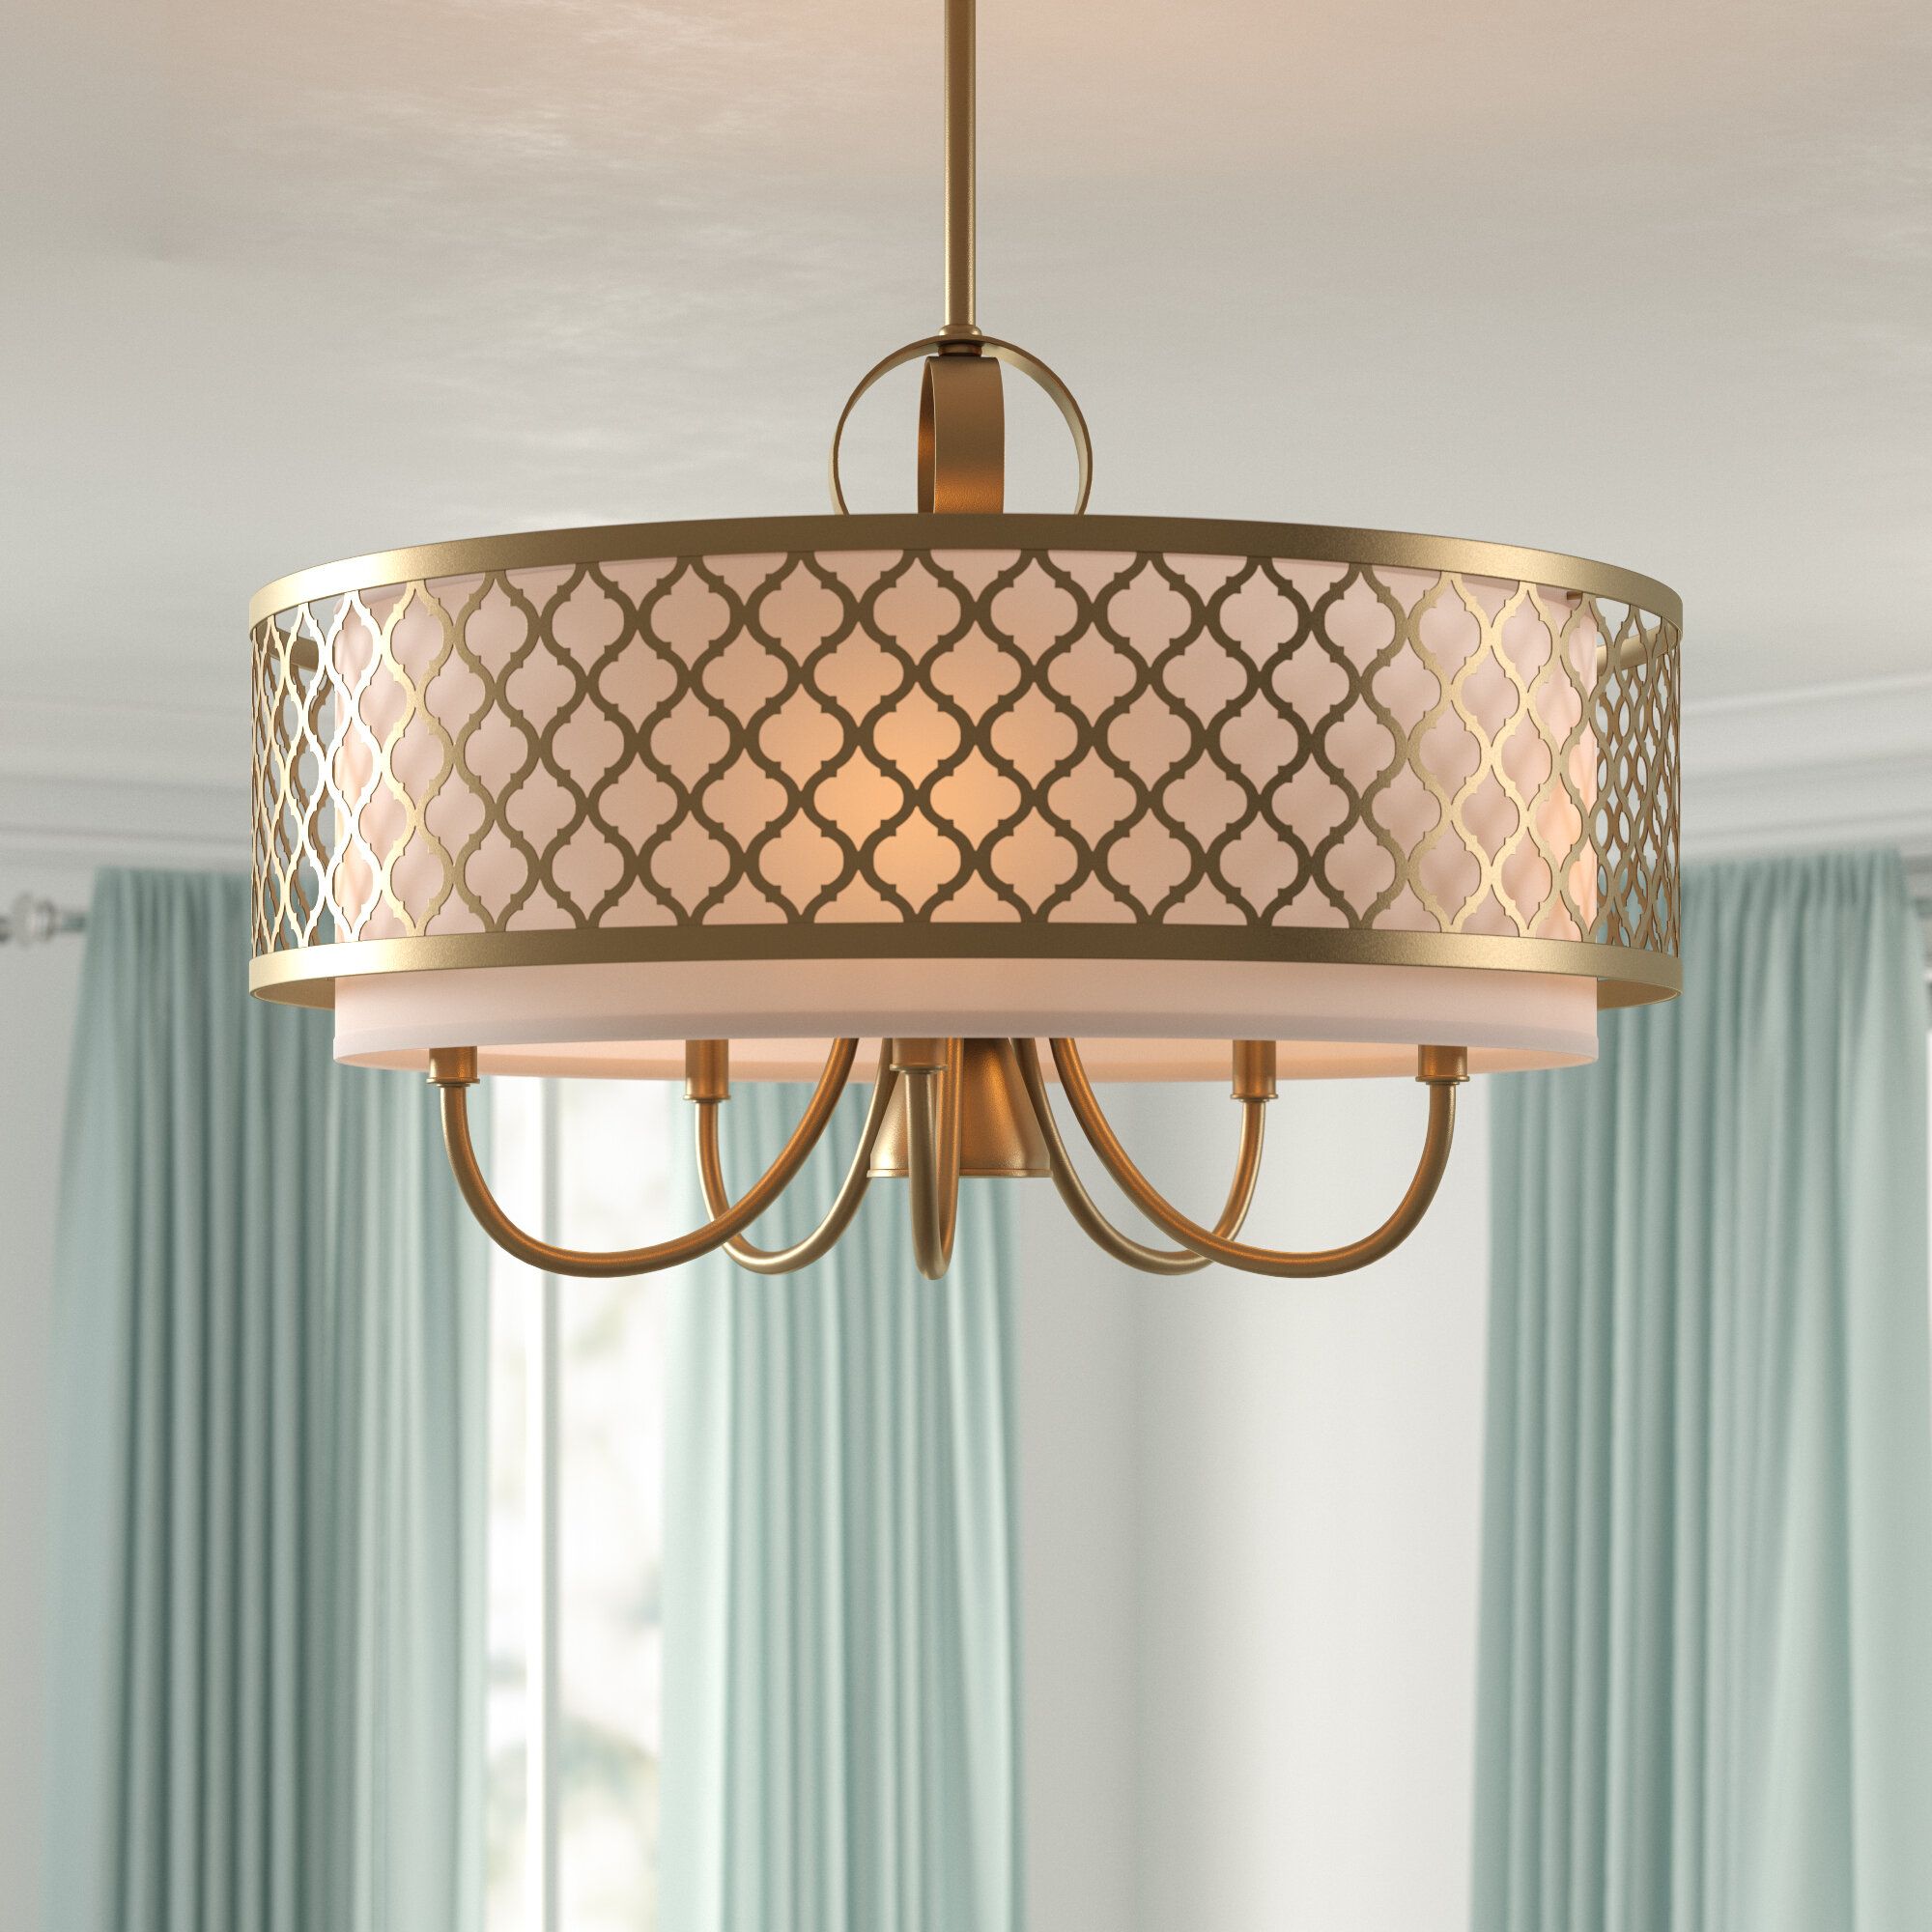 Tymvou 6 Light Drum Chandelier Intended For Wadlington 5 Light Drum Chandeliers (View 9 of 30)